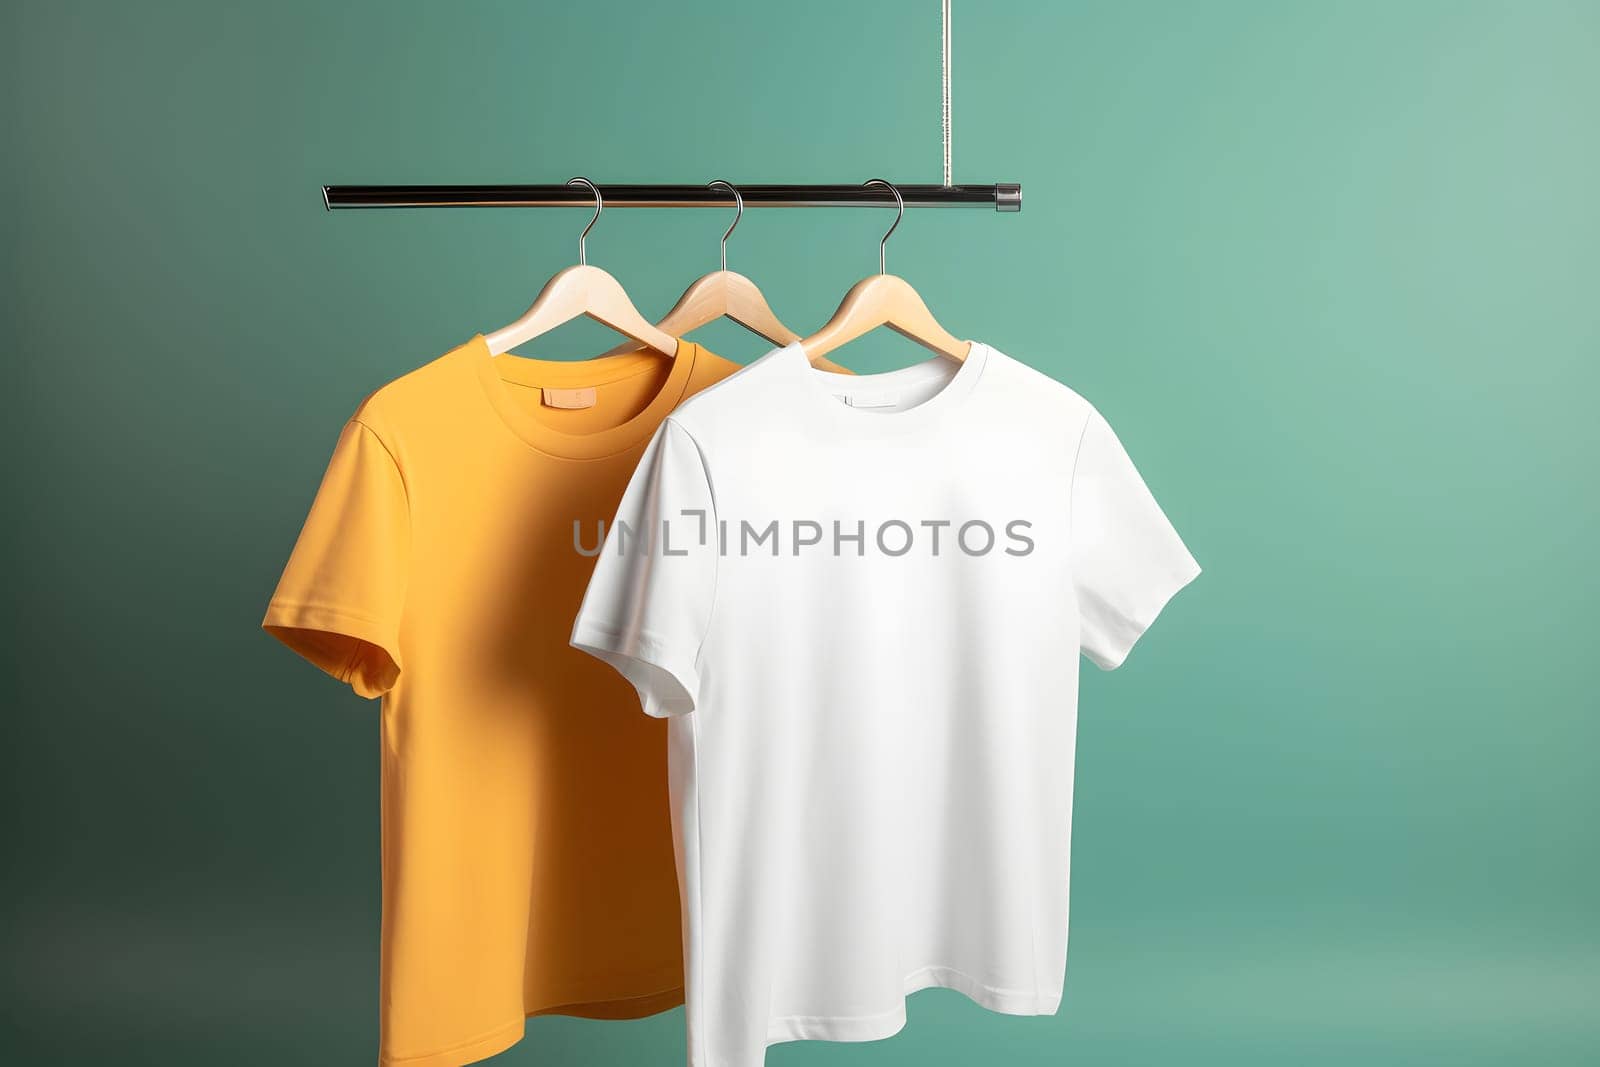 Hangers with blank monocolor t-shirts on green background, neural network generated image by z1b